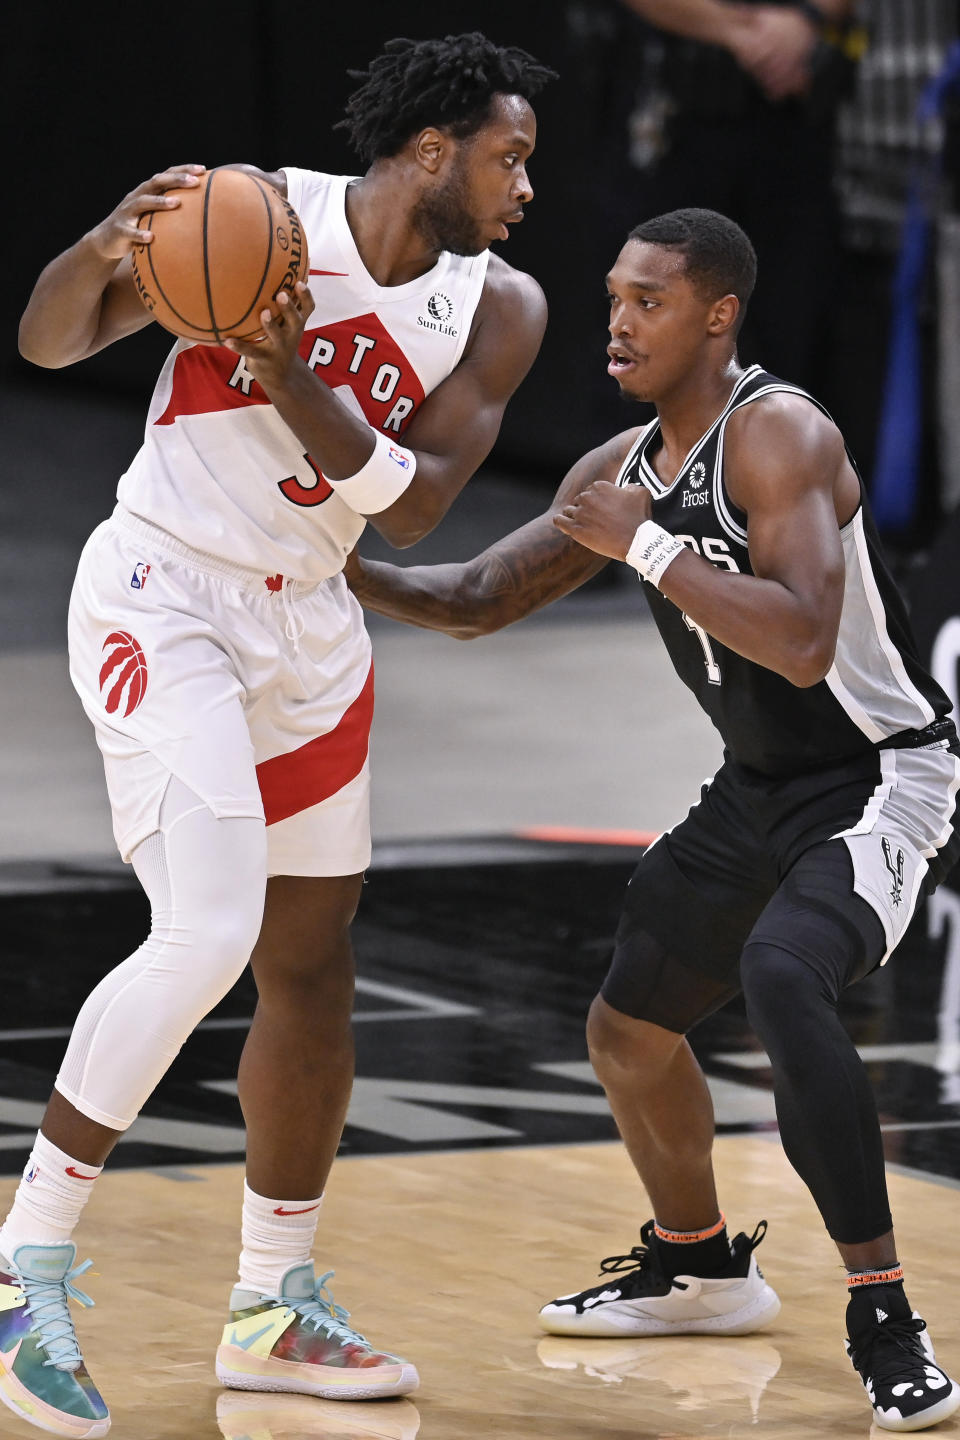 Toronto Raptors' O.G. Anunoby, left, drives against San Antonio Spurs' Lonnie Walker IV during the first half of an NBA basketball game Saturday, Dec. 26, 2020, in San Antonio. (AP Photo/Darren Abate)